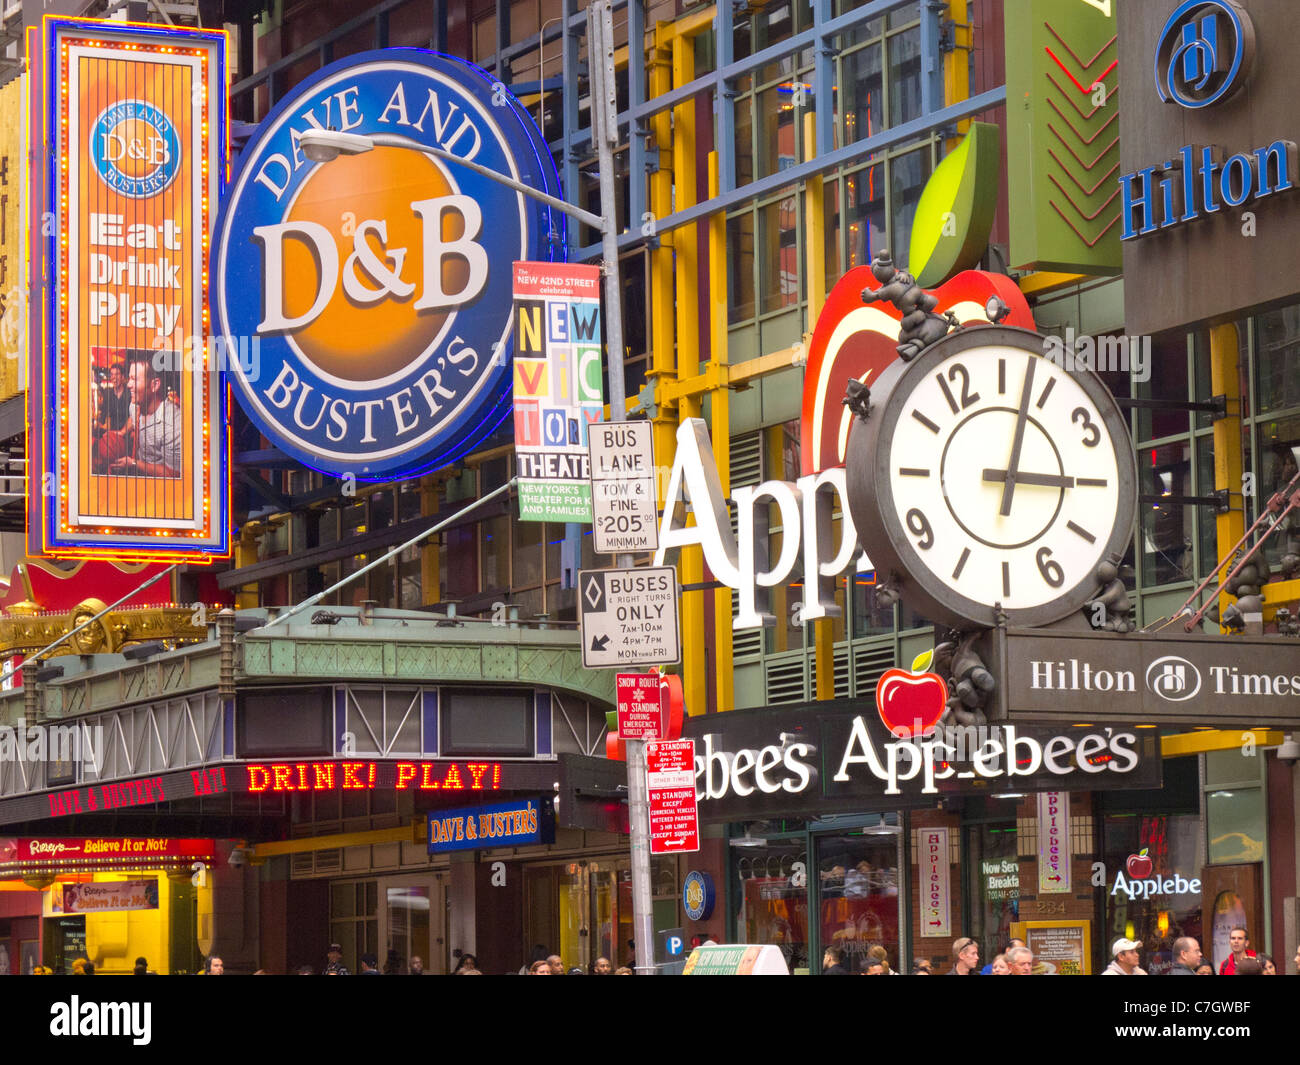 Times Square stores in New York City Stock Photo